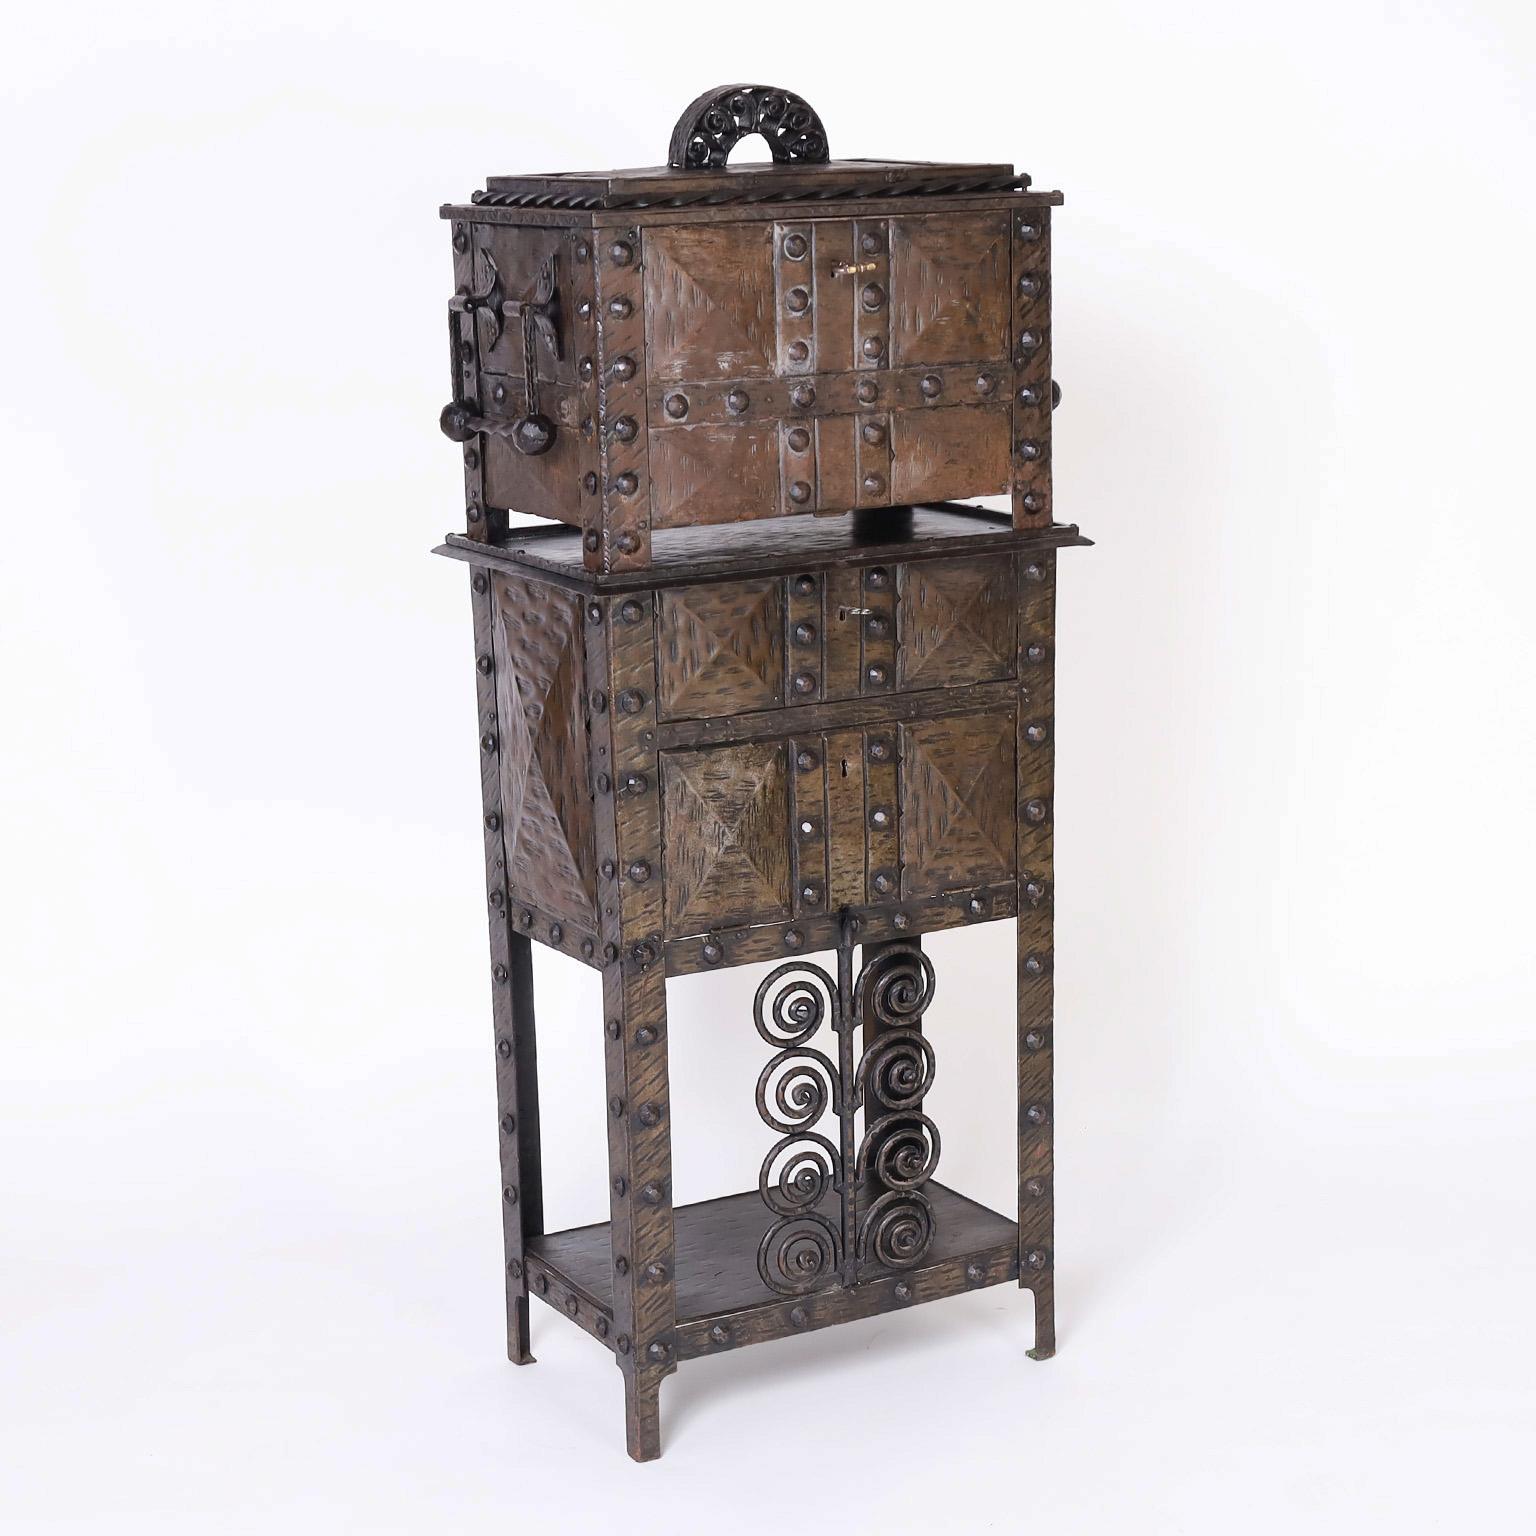 Rare and remarkable French two piece bar cabinet crafted in an eccentric composition of bronze and iron with hand hammered handles, rivets, spiraling designs and lockable compartments.